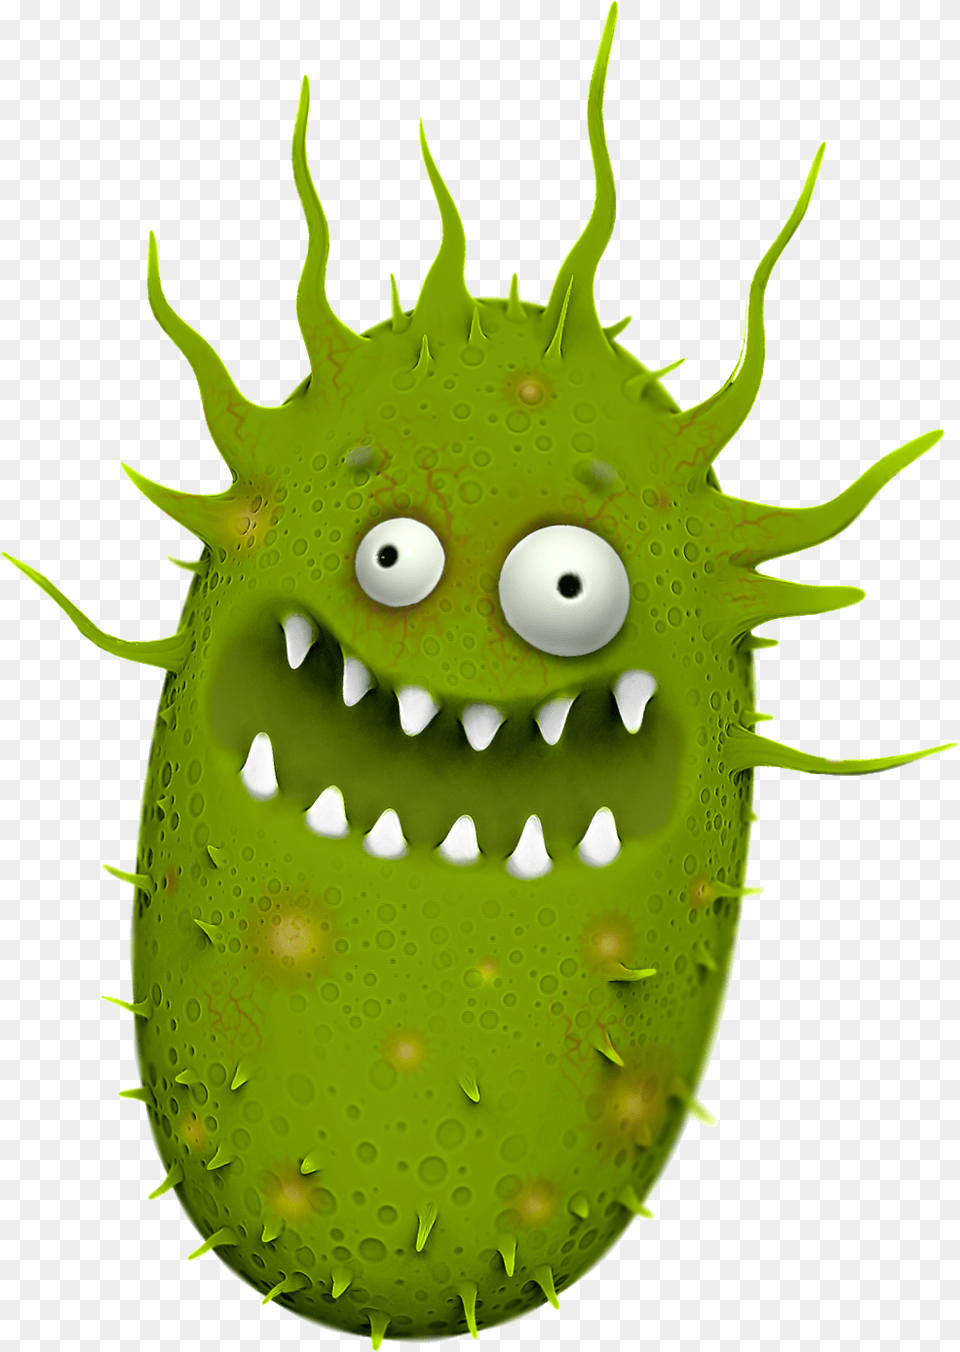 Bacteria, Cucumber, Food, Plant, Produce Png Image